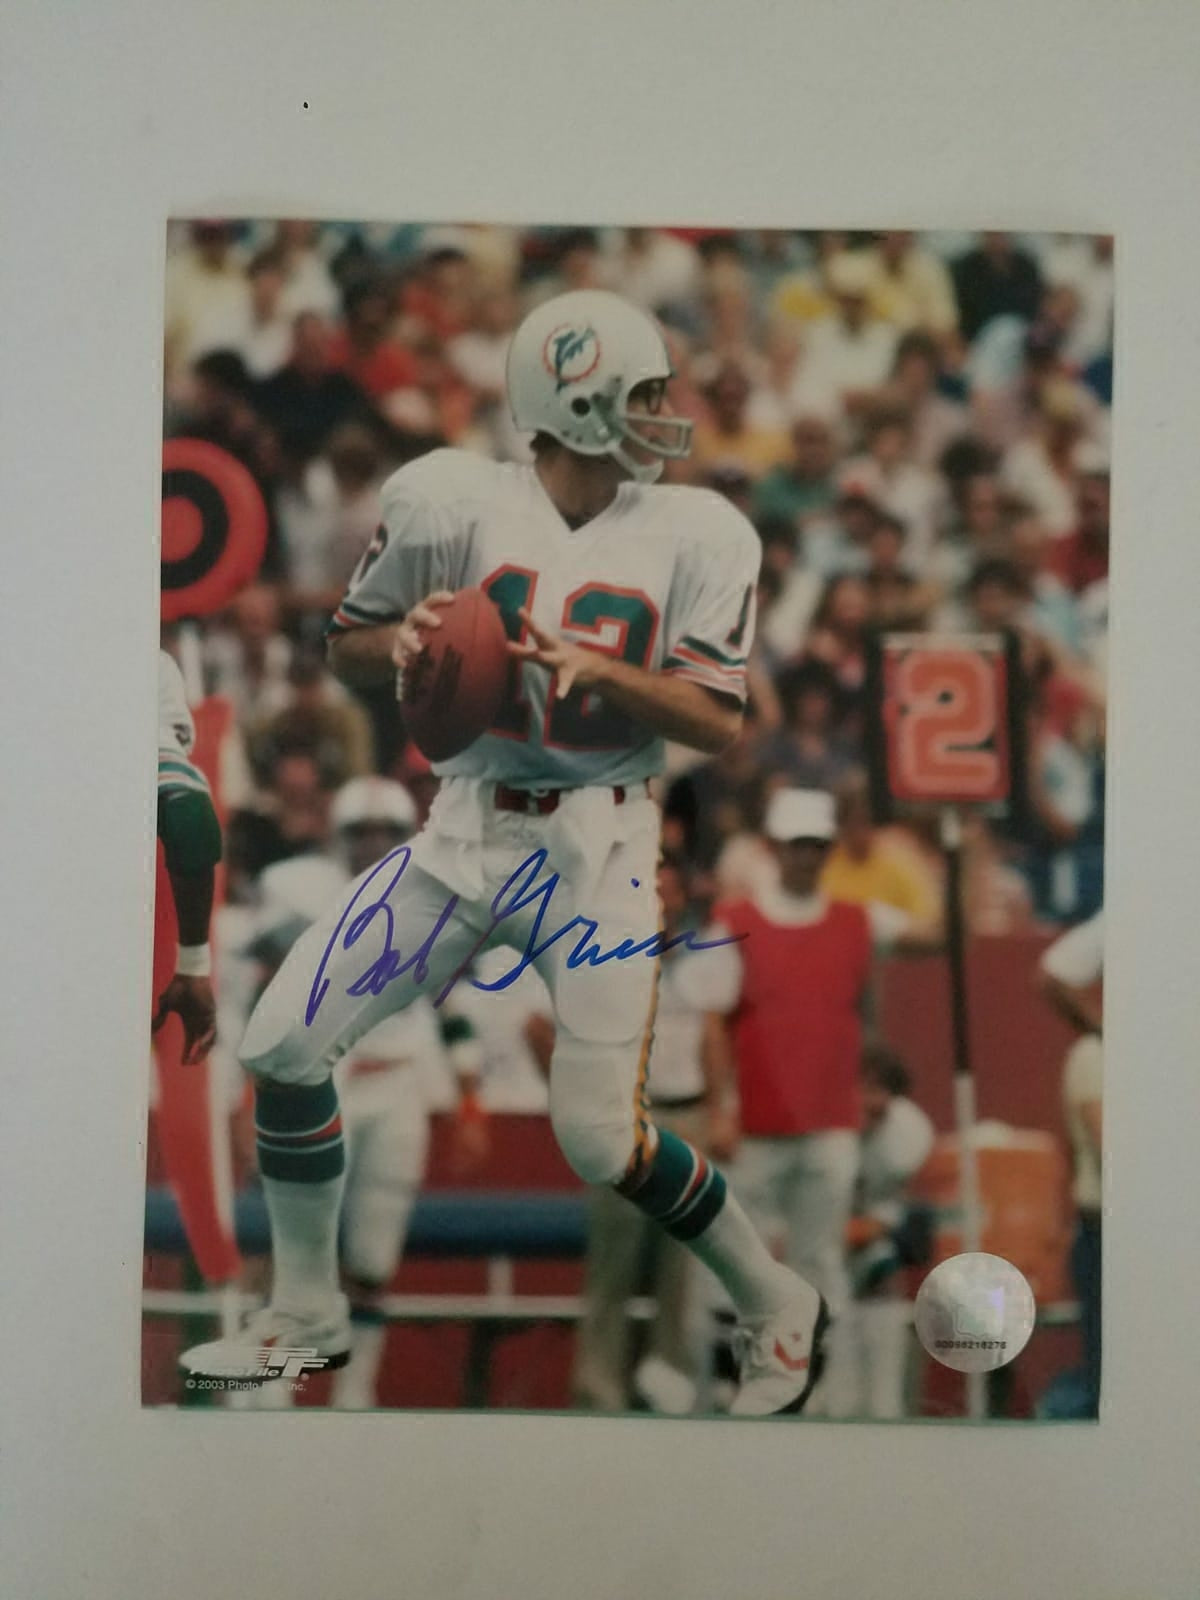 Bob Griese Miami Dolphins Hall of Fame quarterback 8x10 signed with proof